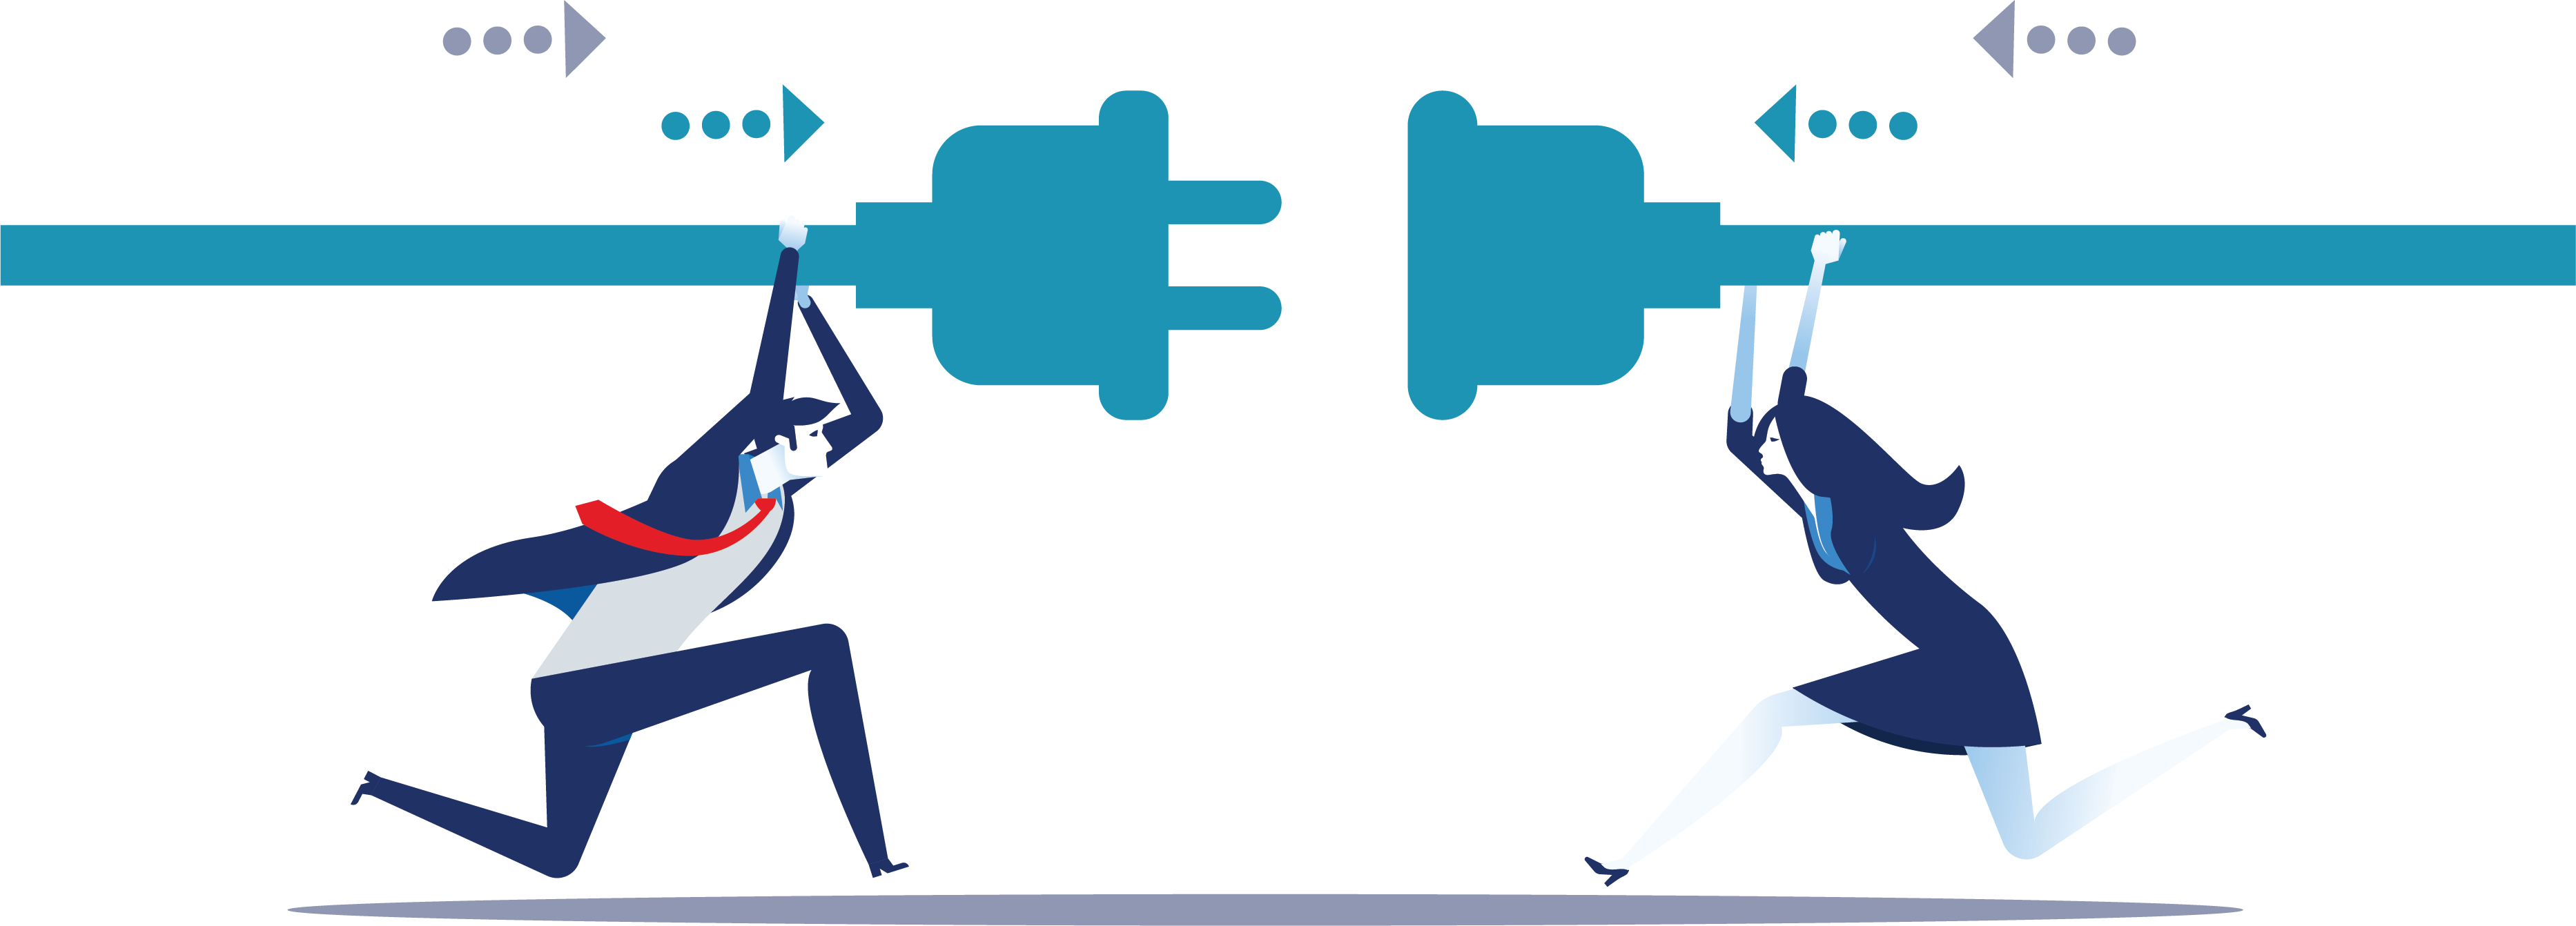 Brand image from The Cyber Scheme, depicting two people fitting a plug and a socket together